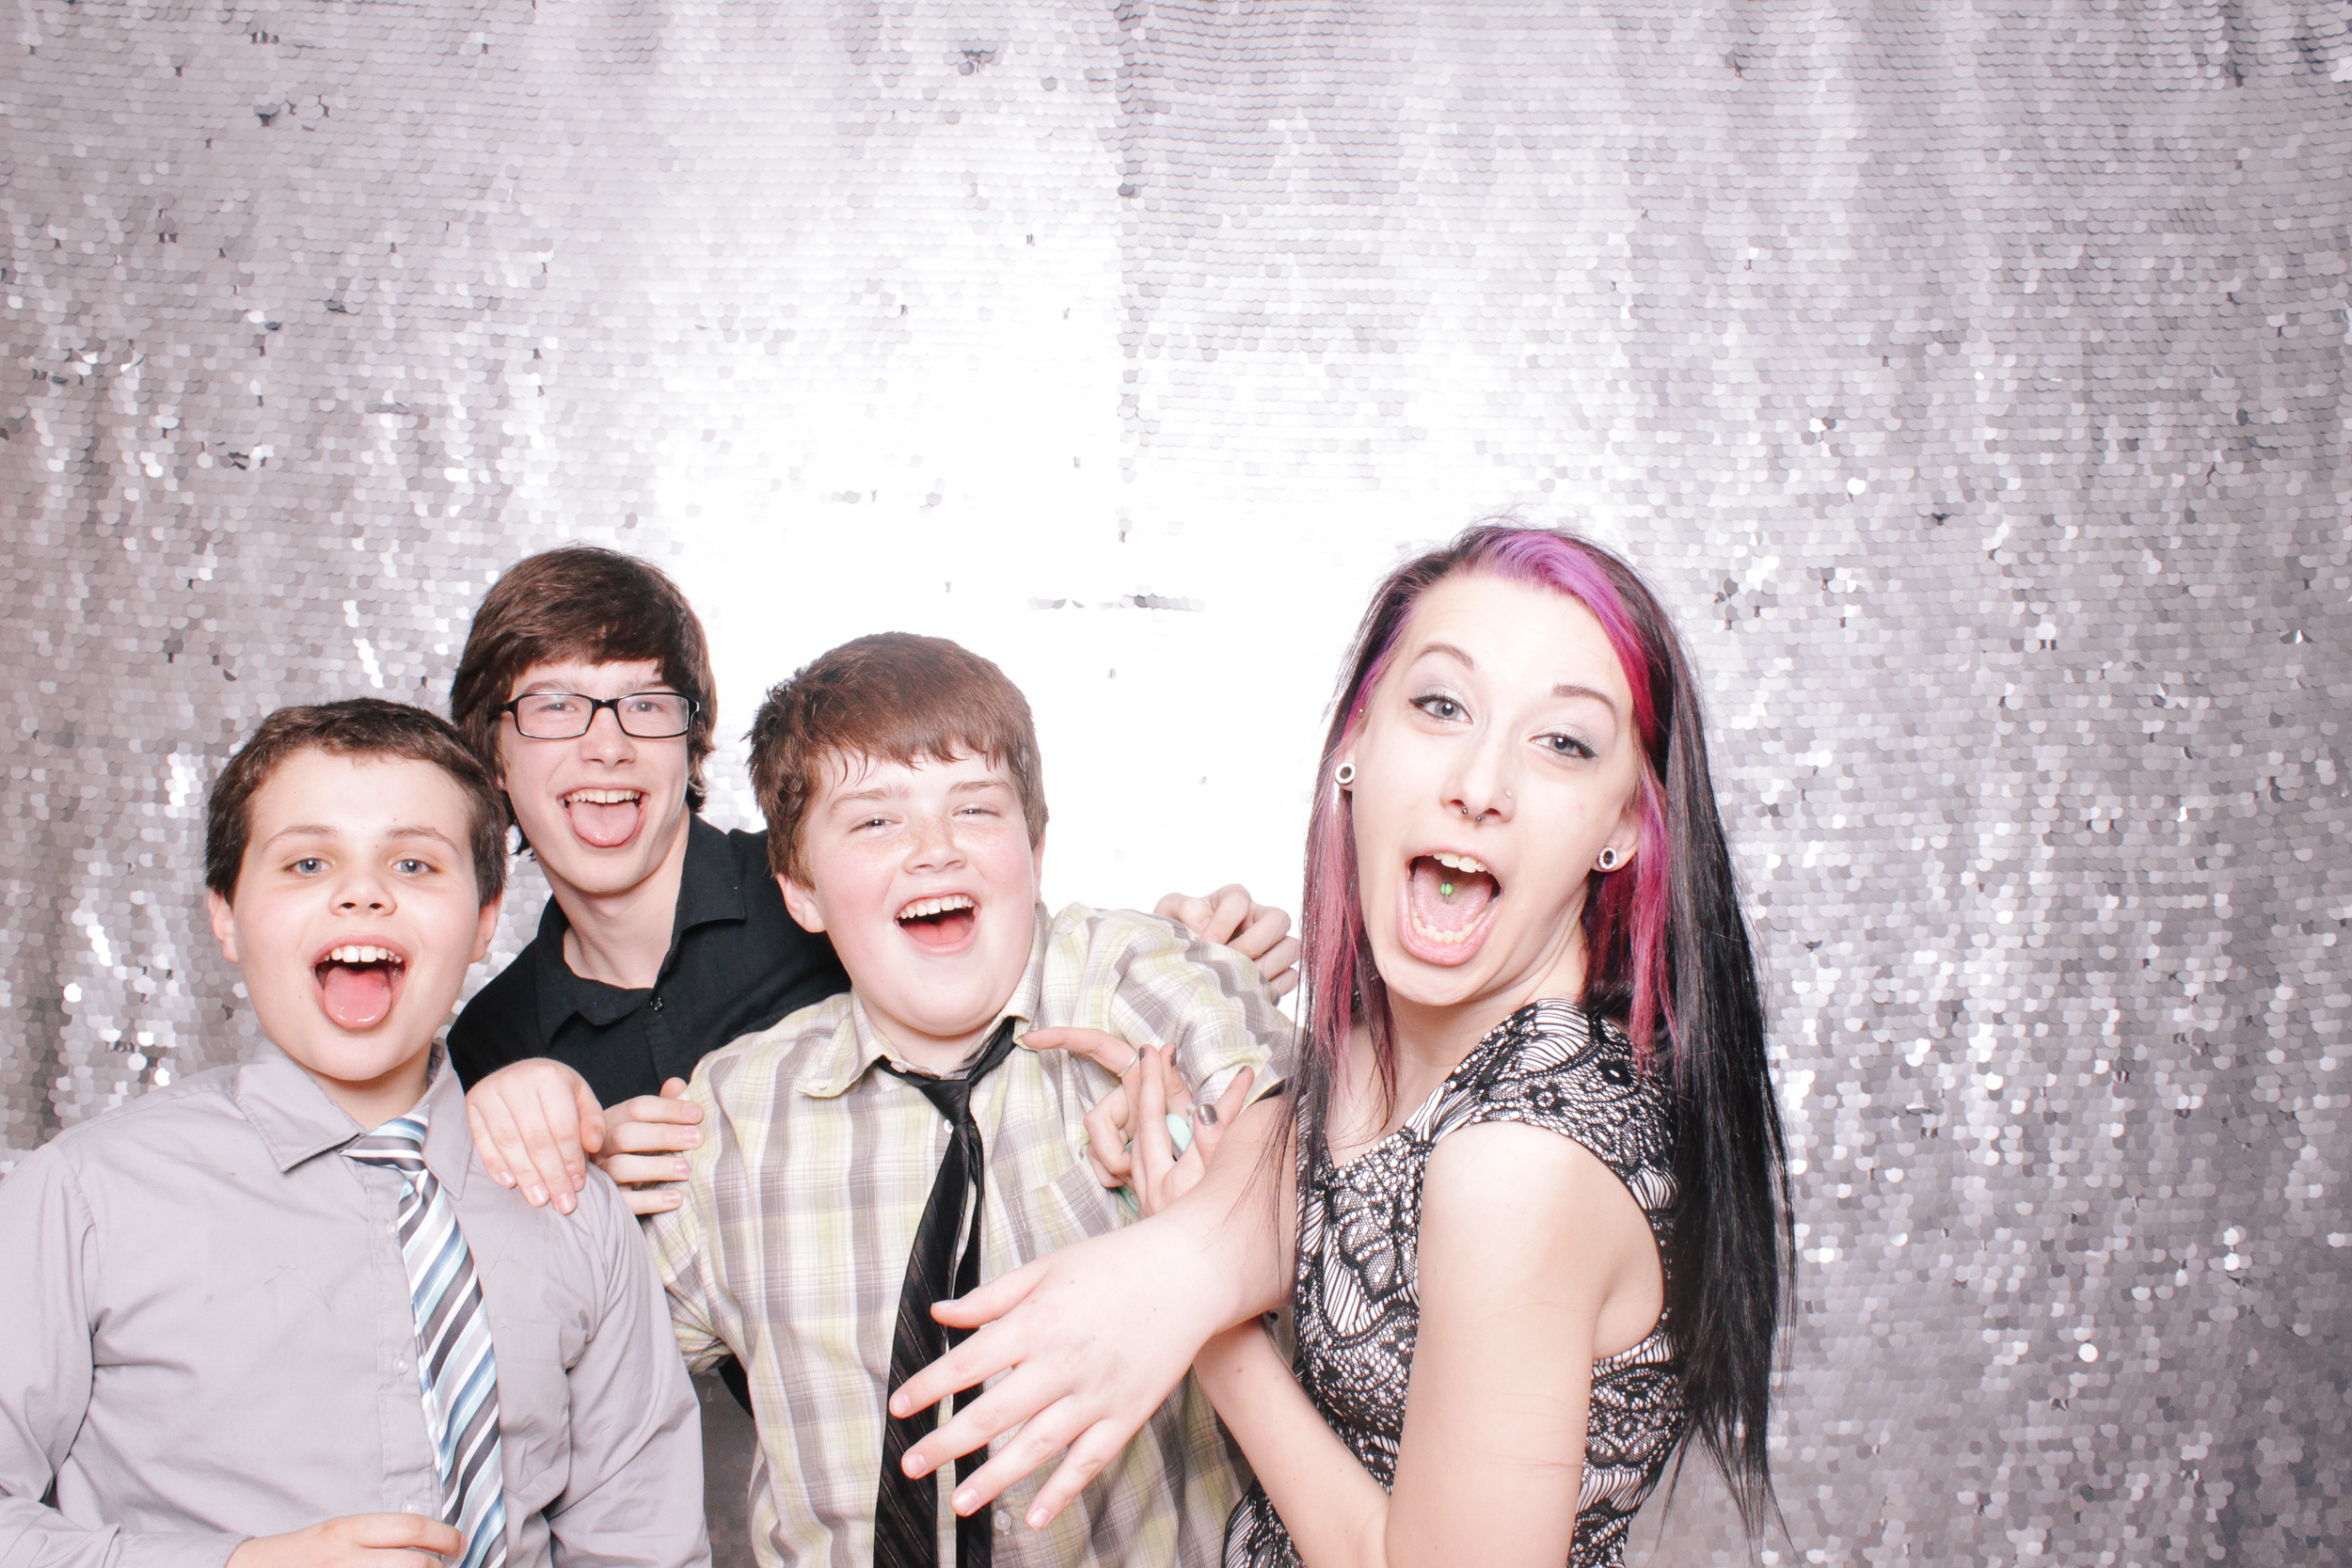 00038-Megs Sweet 16 Birthday Photo Booth in Cleveland-20150418.jpg